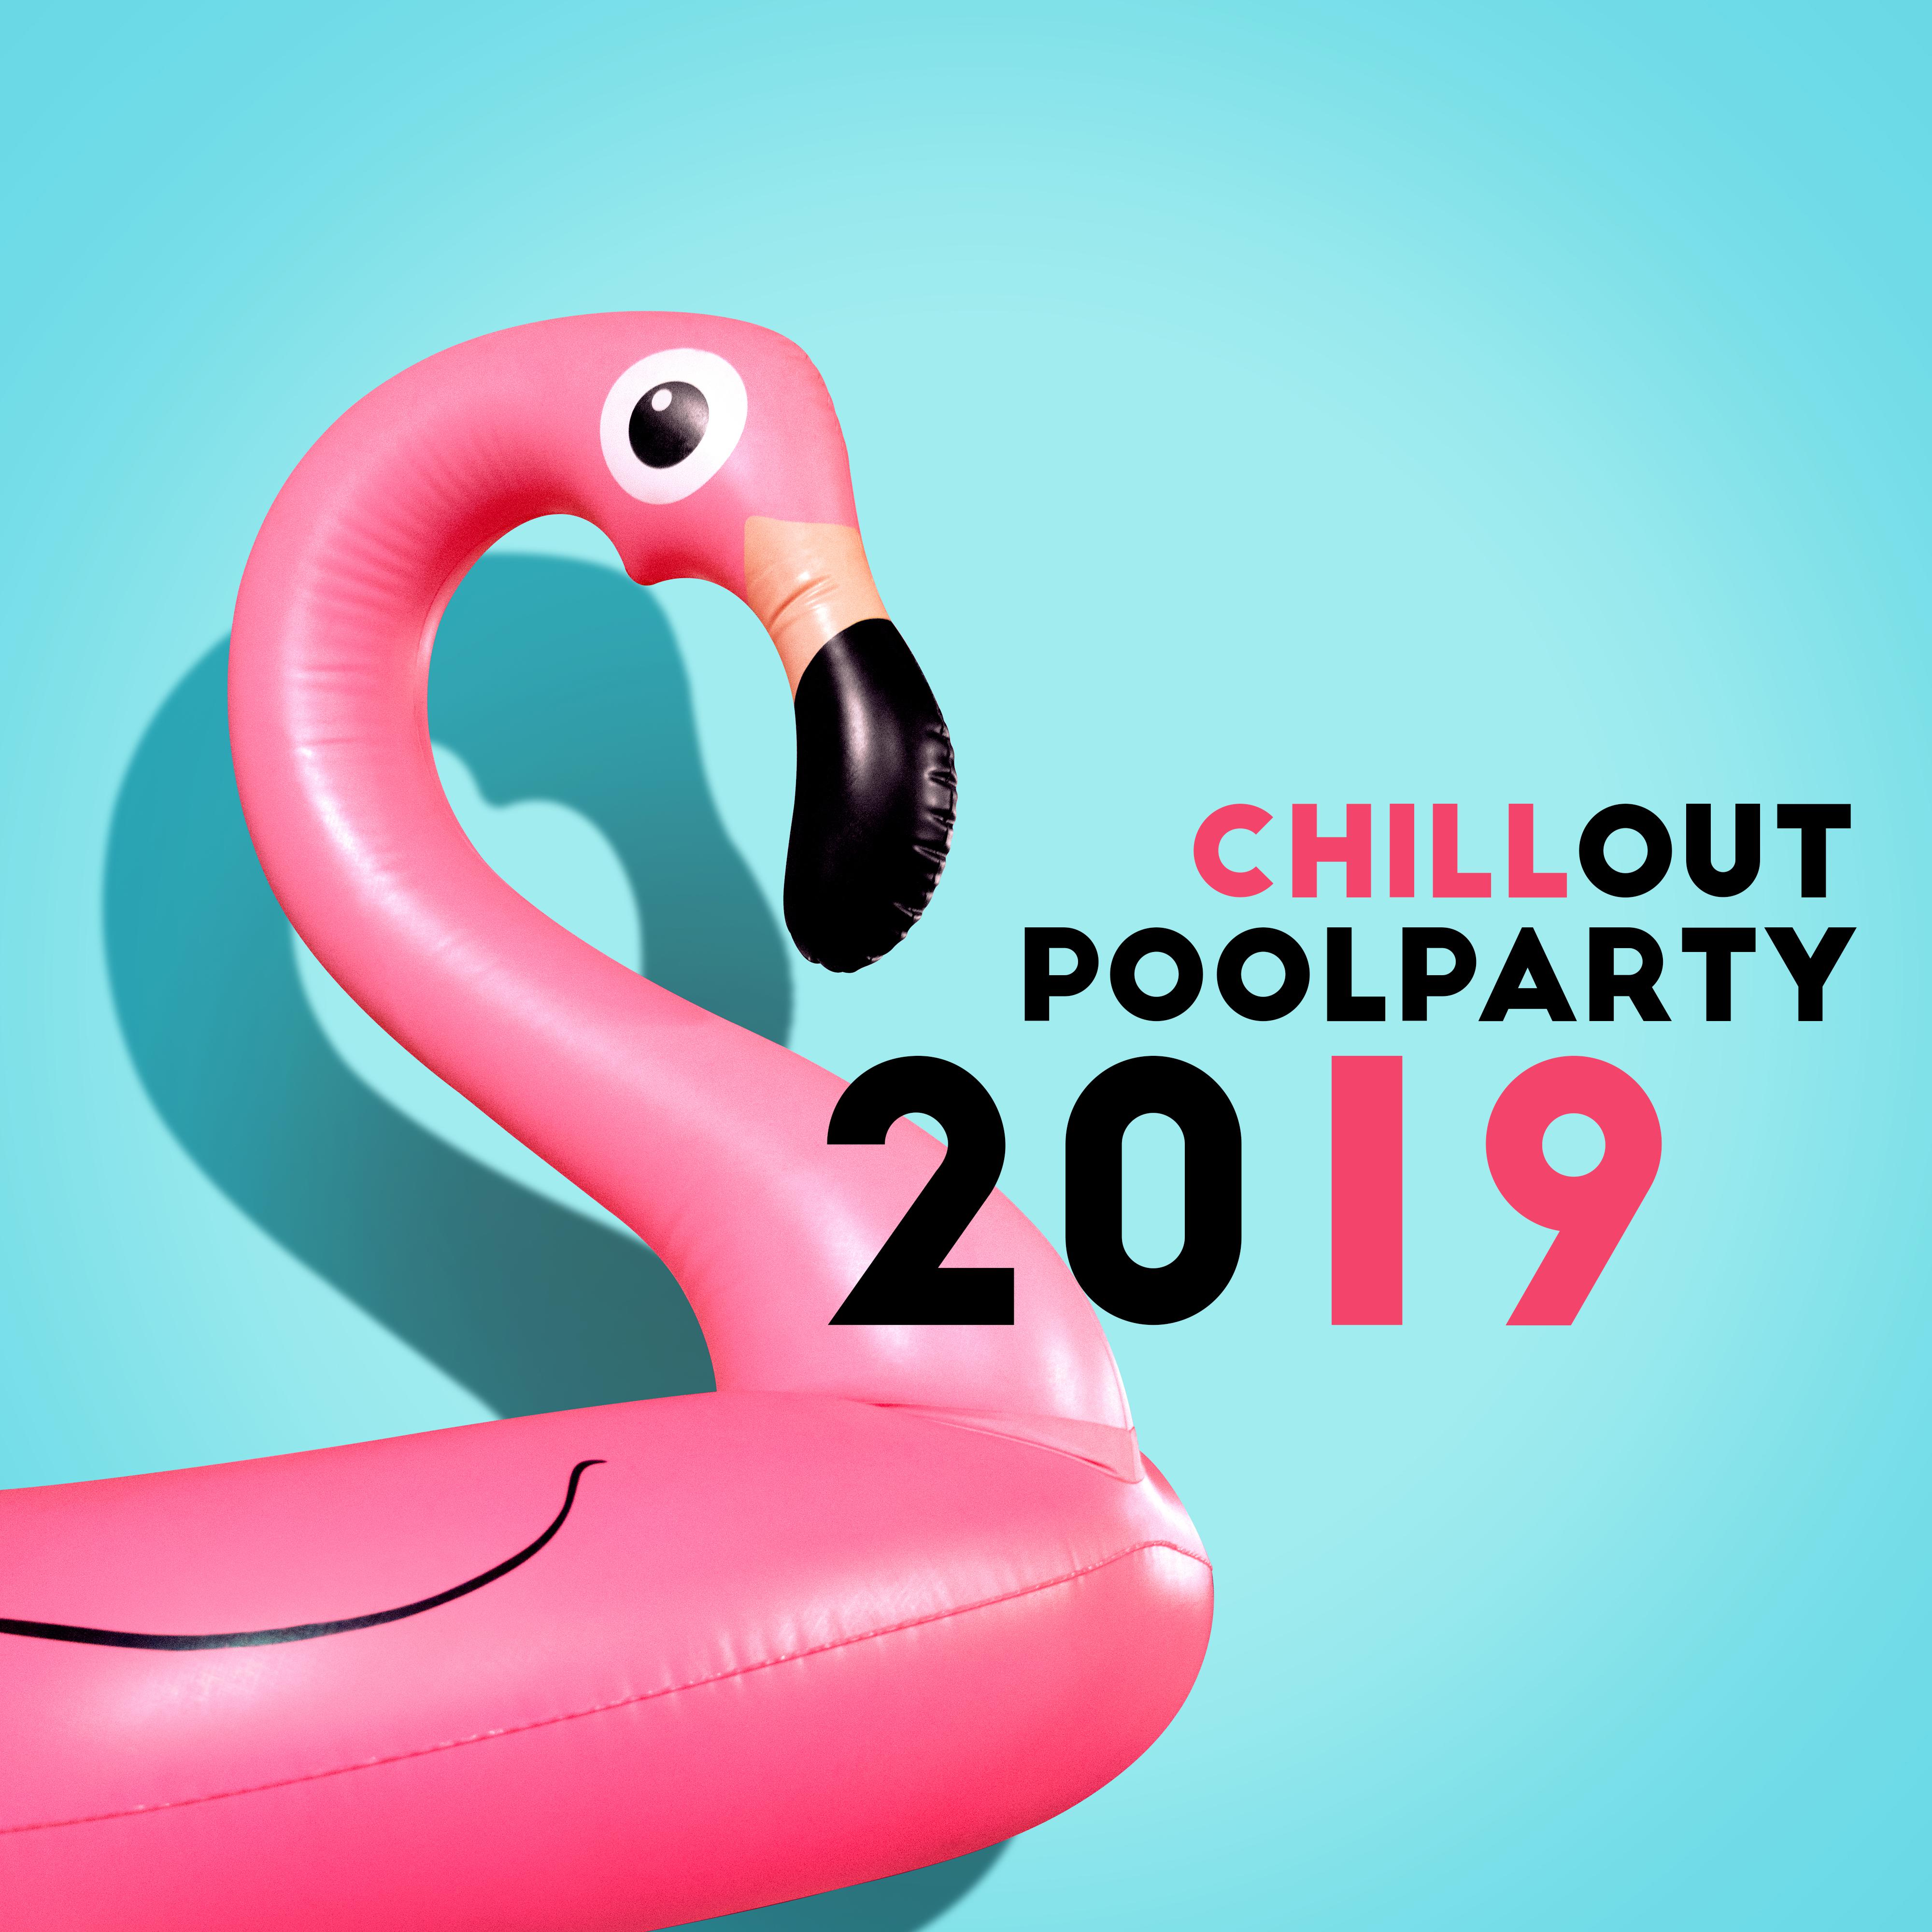 Chillout Poolparty 2019: 15 Top EDM Slow Chill Out Tracks for Ibiza Dance Party, Cocktails & Drinks, Bikini Beach Club, Summer Club Music Mix